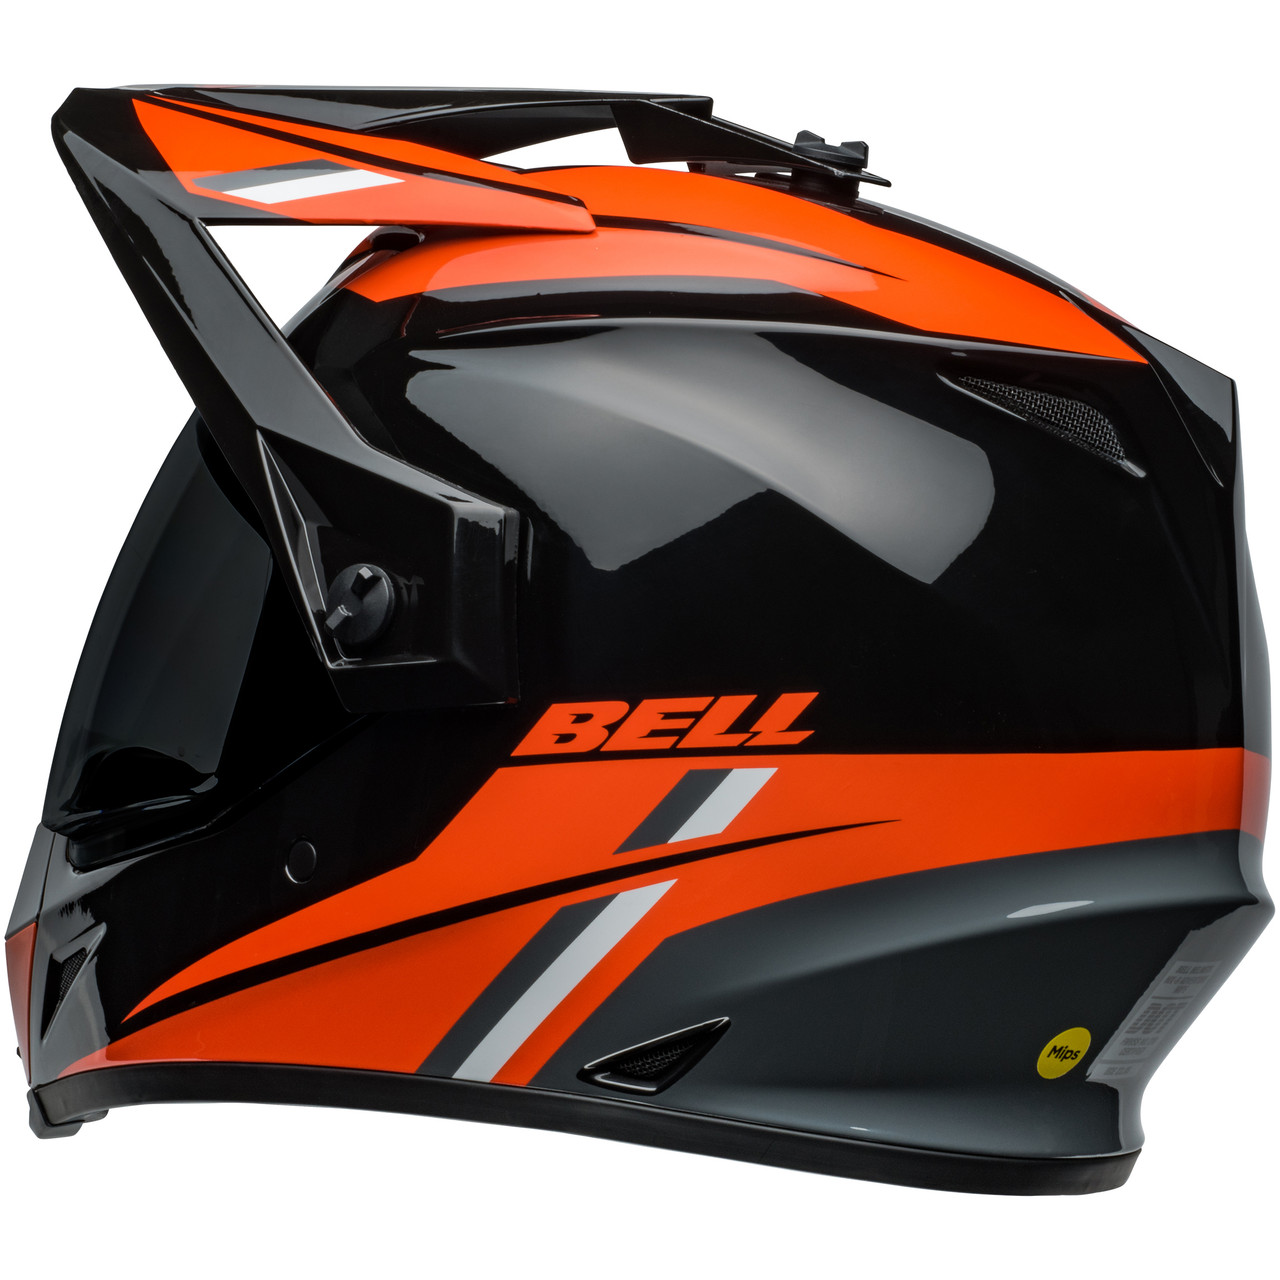 Casque Bell MX 9 Adventure Mips Dash gloss black red, trail